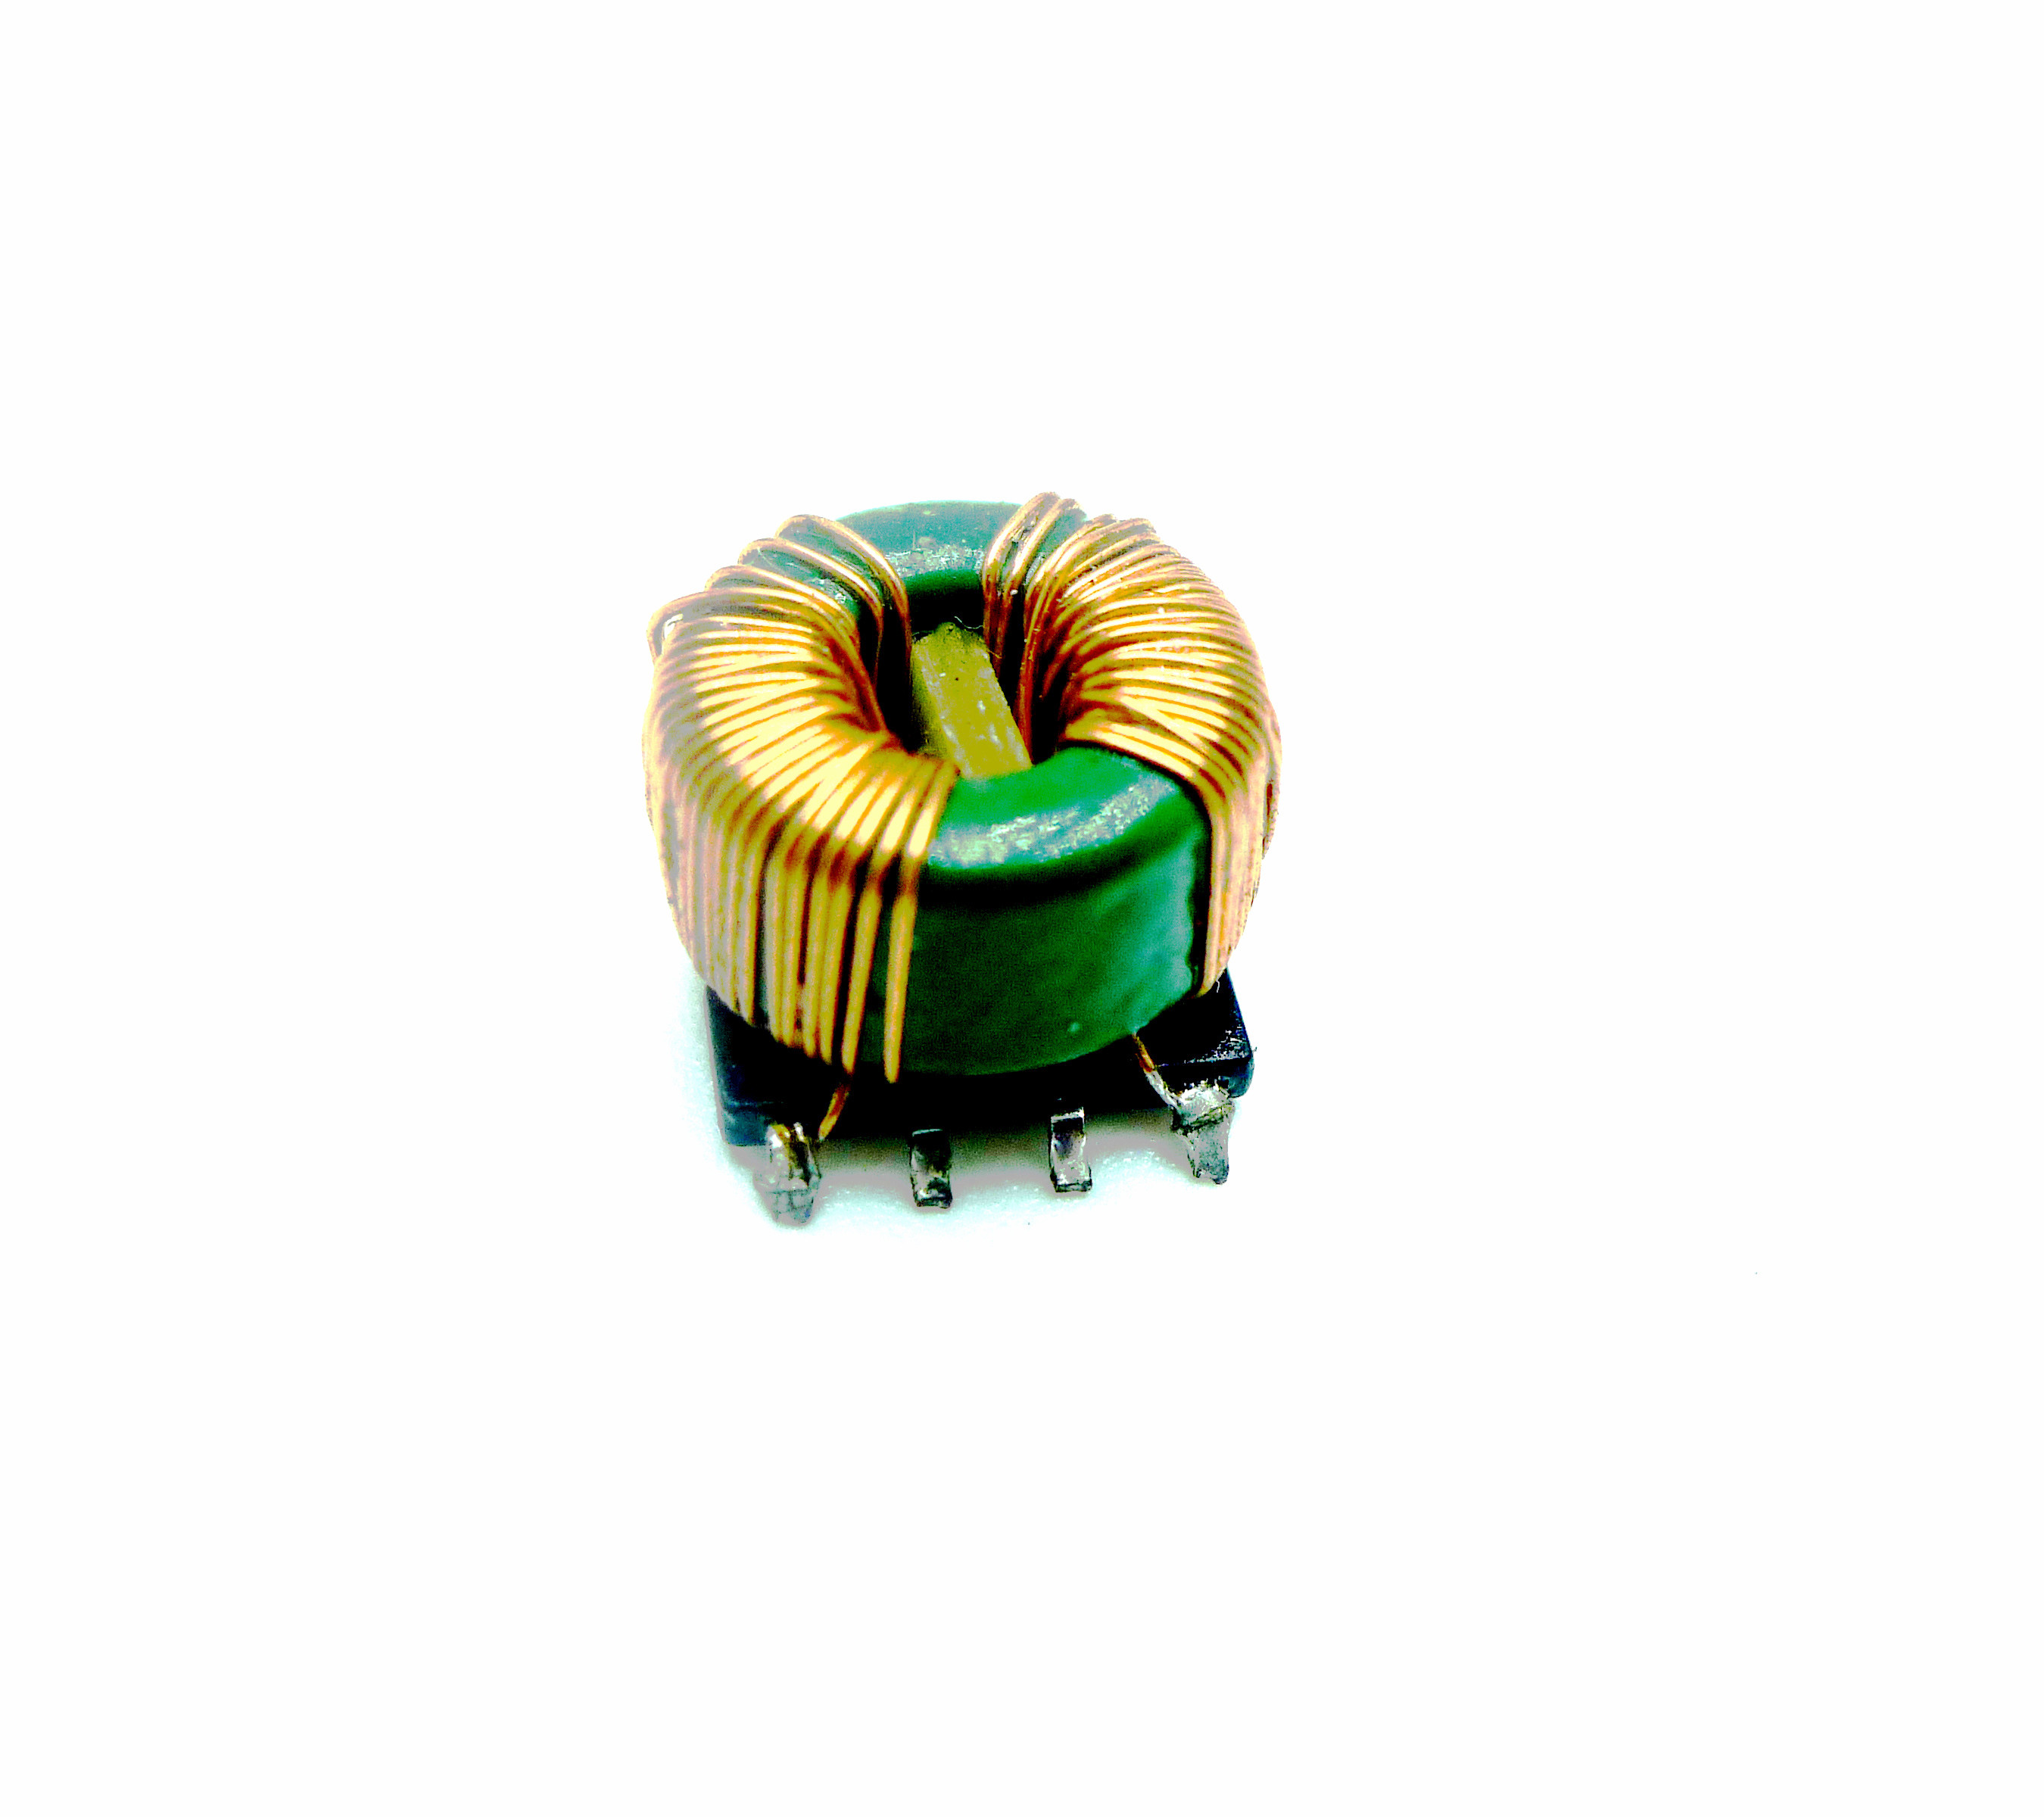  SMD Toroidal Common mode Choke Coil,PSCM1006-602M Series Available in Various Sizes,Comes with Large Current and Low Manufactures